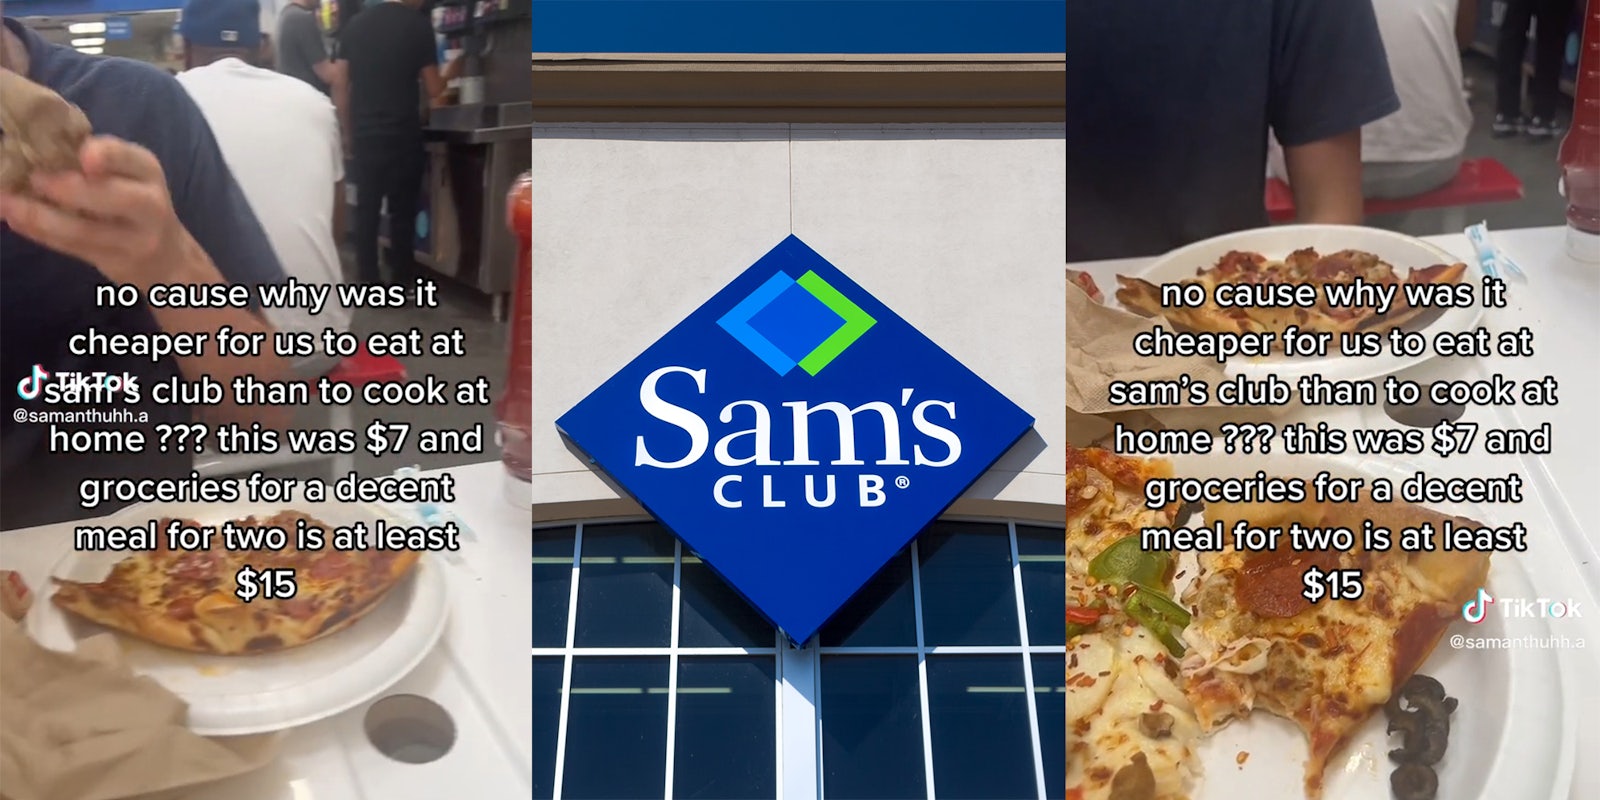 Customer says it's cheaper to eat at Sam's Club than buy groceries